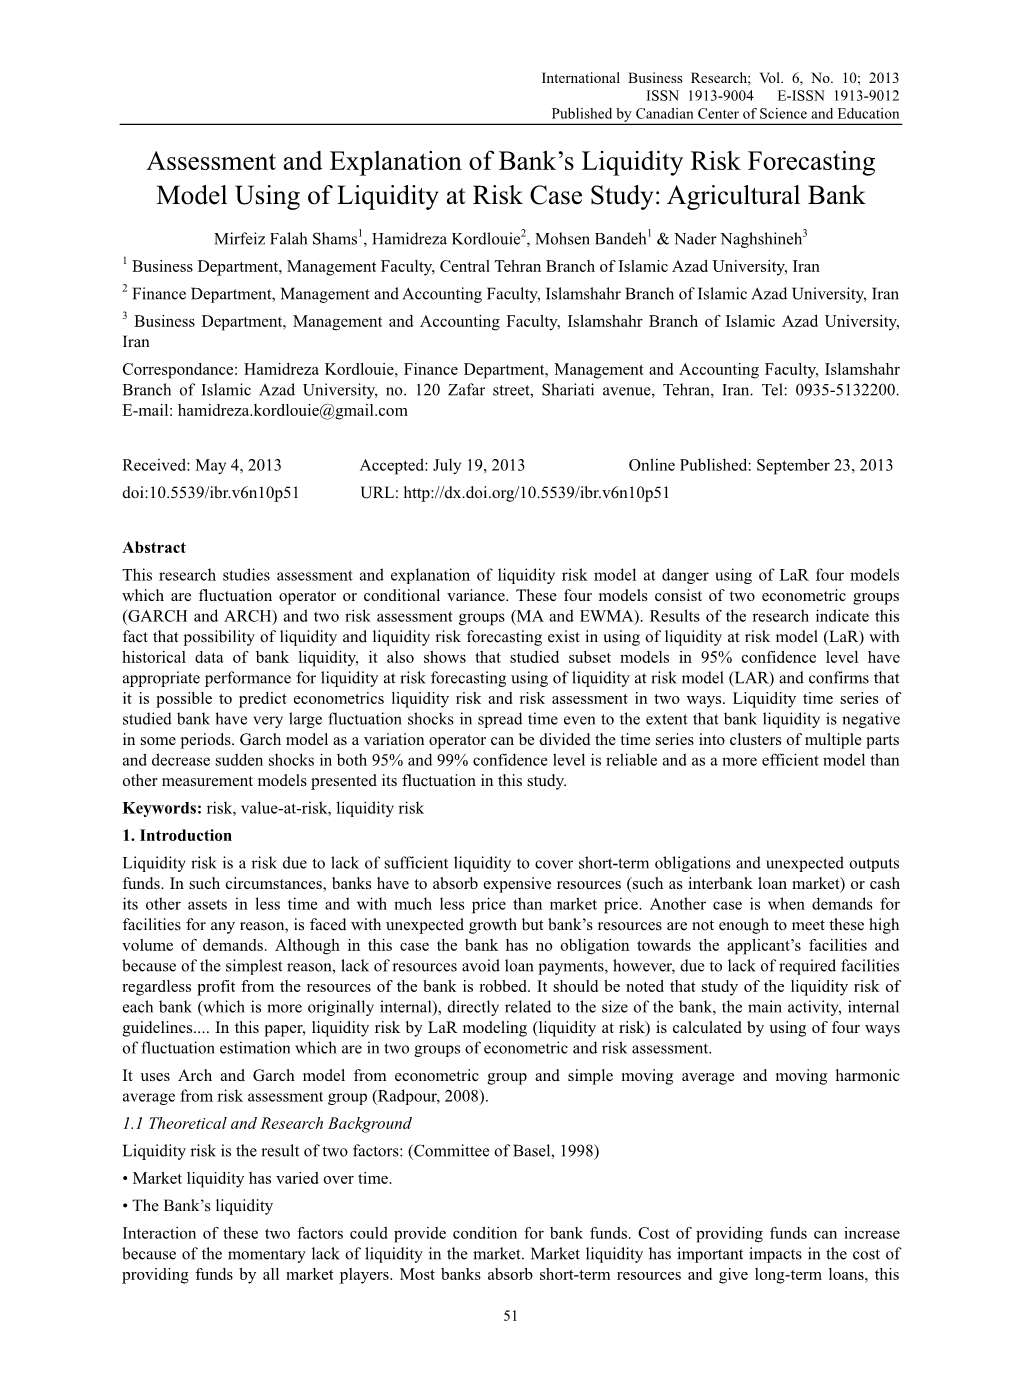 Assessment and Explanation of Bank's Liquidity